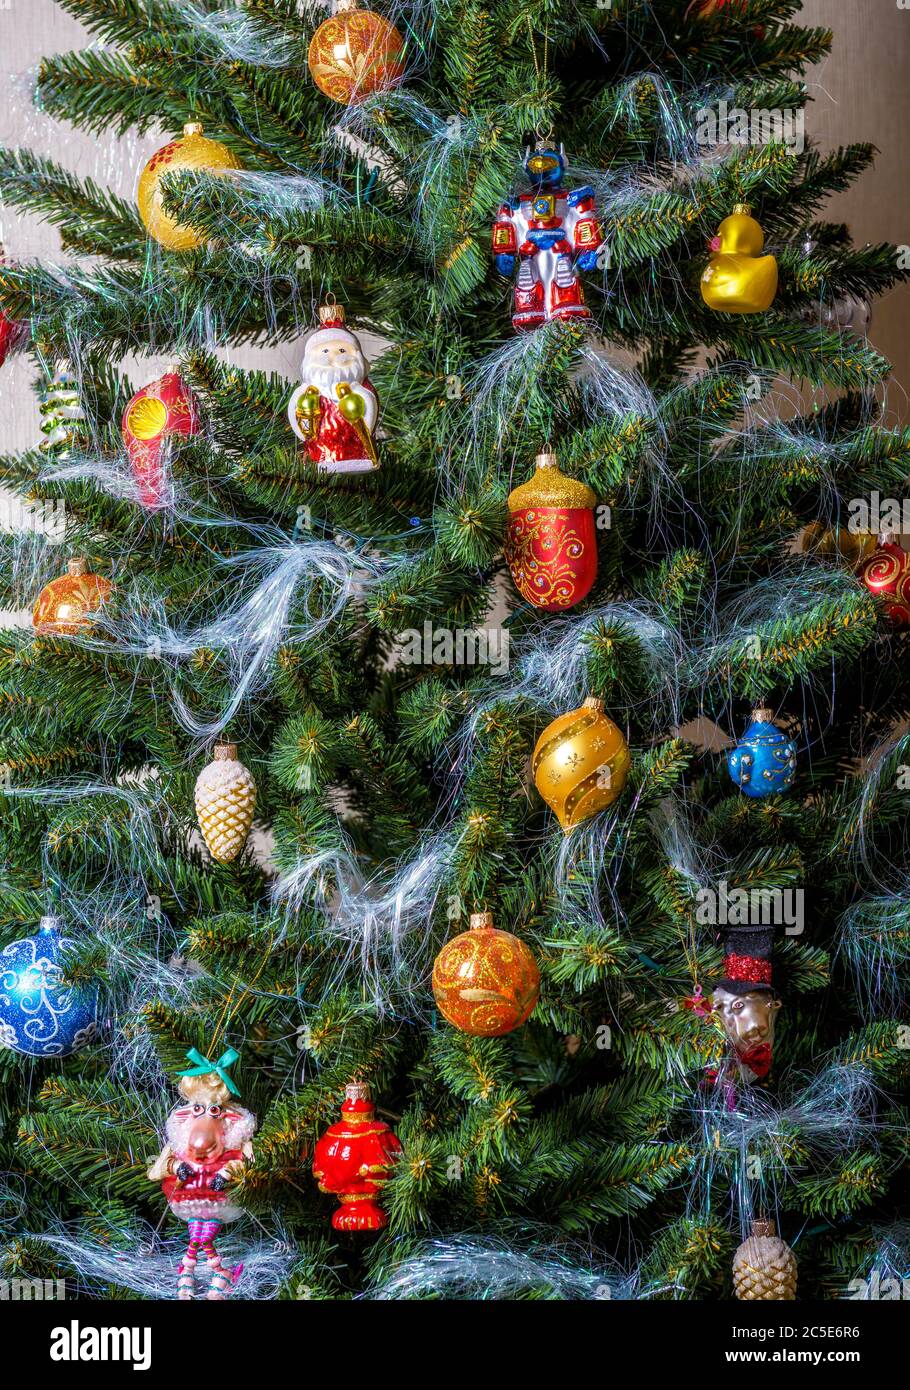 Merry Christmas and Happy New Year. Christmas tree decoration. Stock Photo